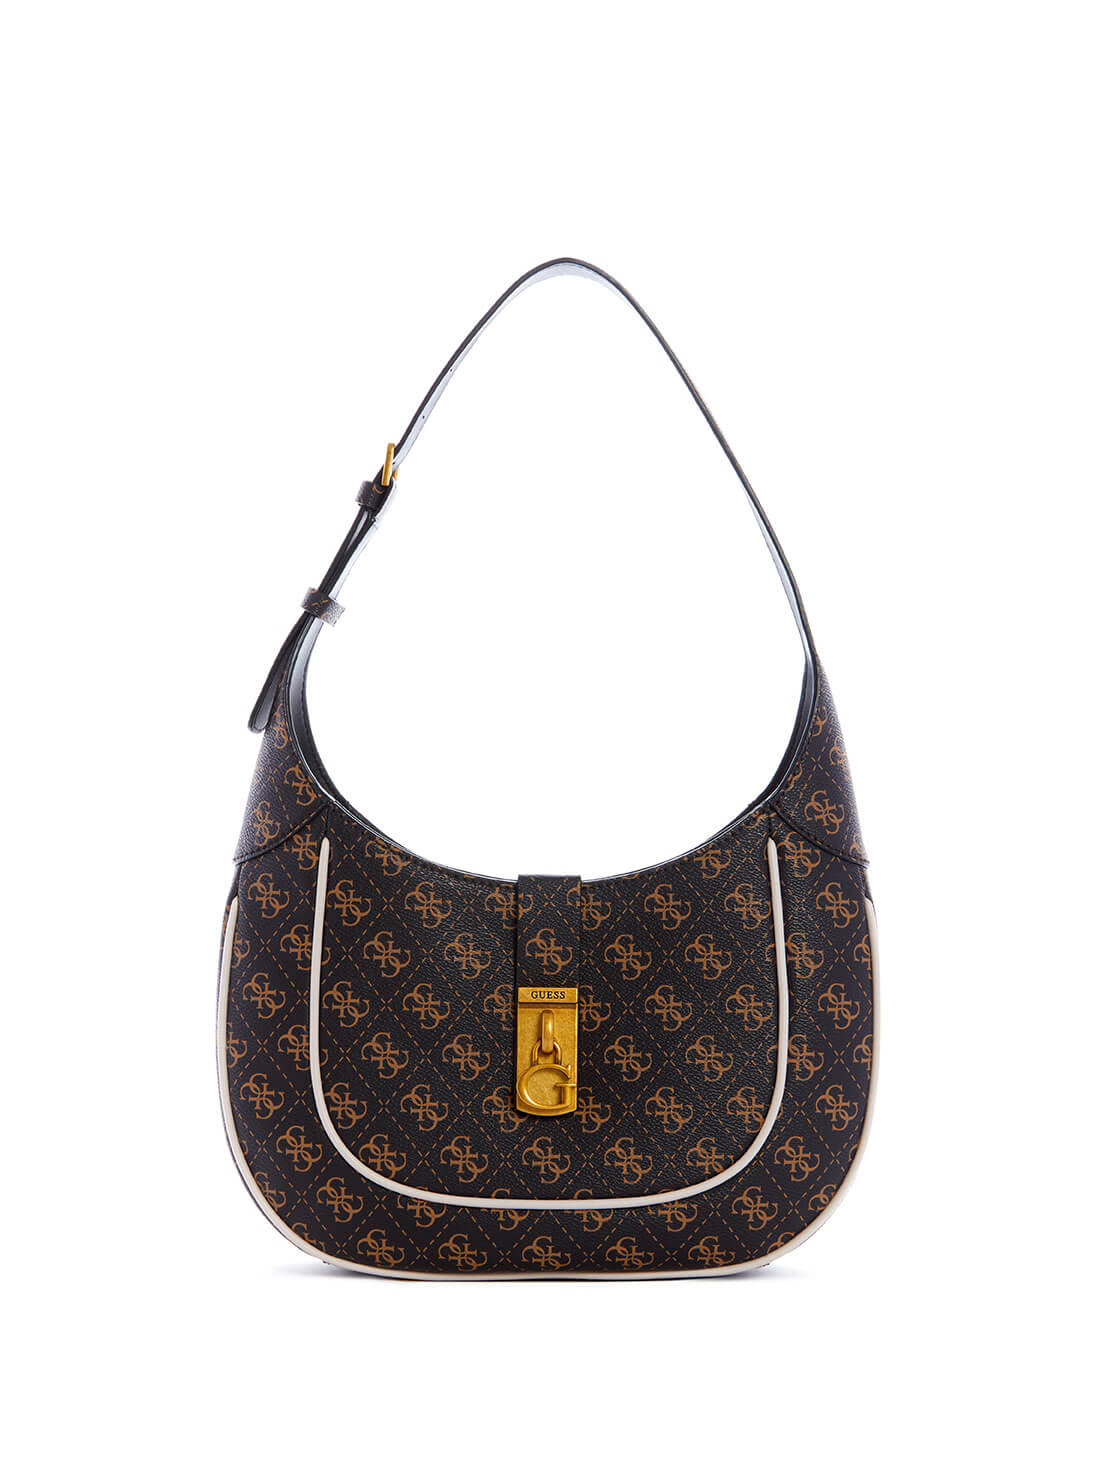 GUESS Womens Black Brown Logo Maimie Hobo Bag SB840902 Front View